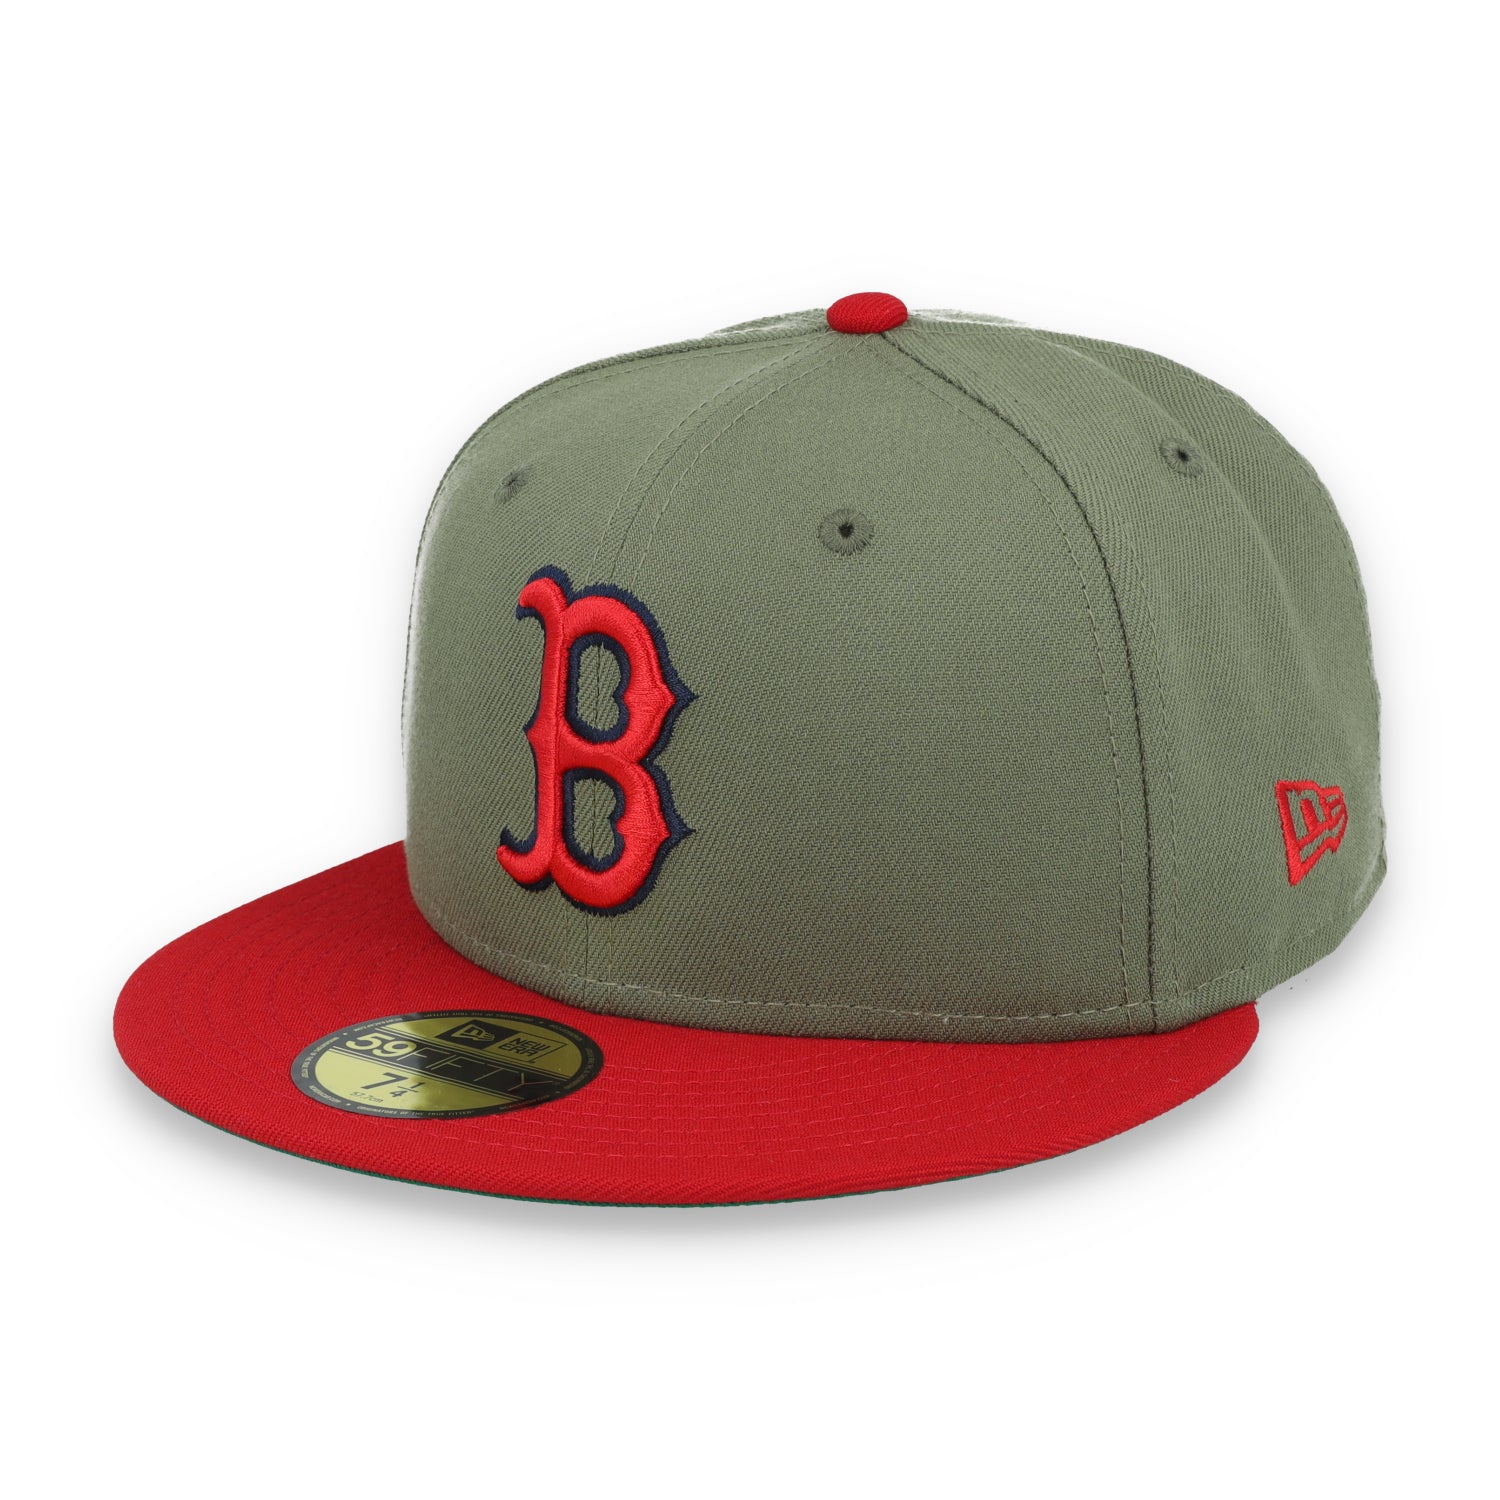 New Era Boston Red Sox 90th Anniversary Side Patch 59FIFTY Fitted Hat- Olive Green